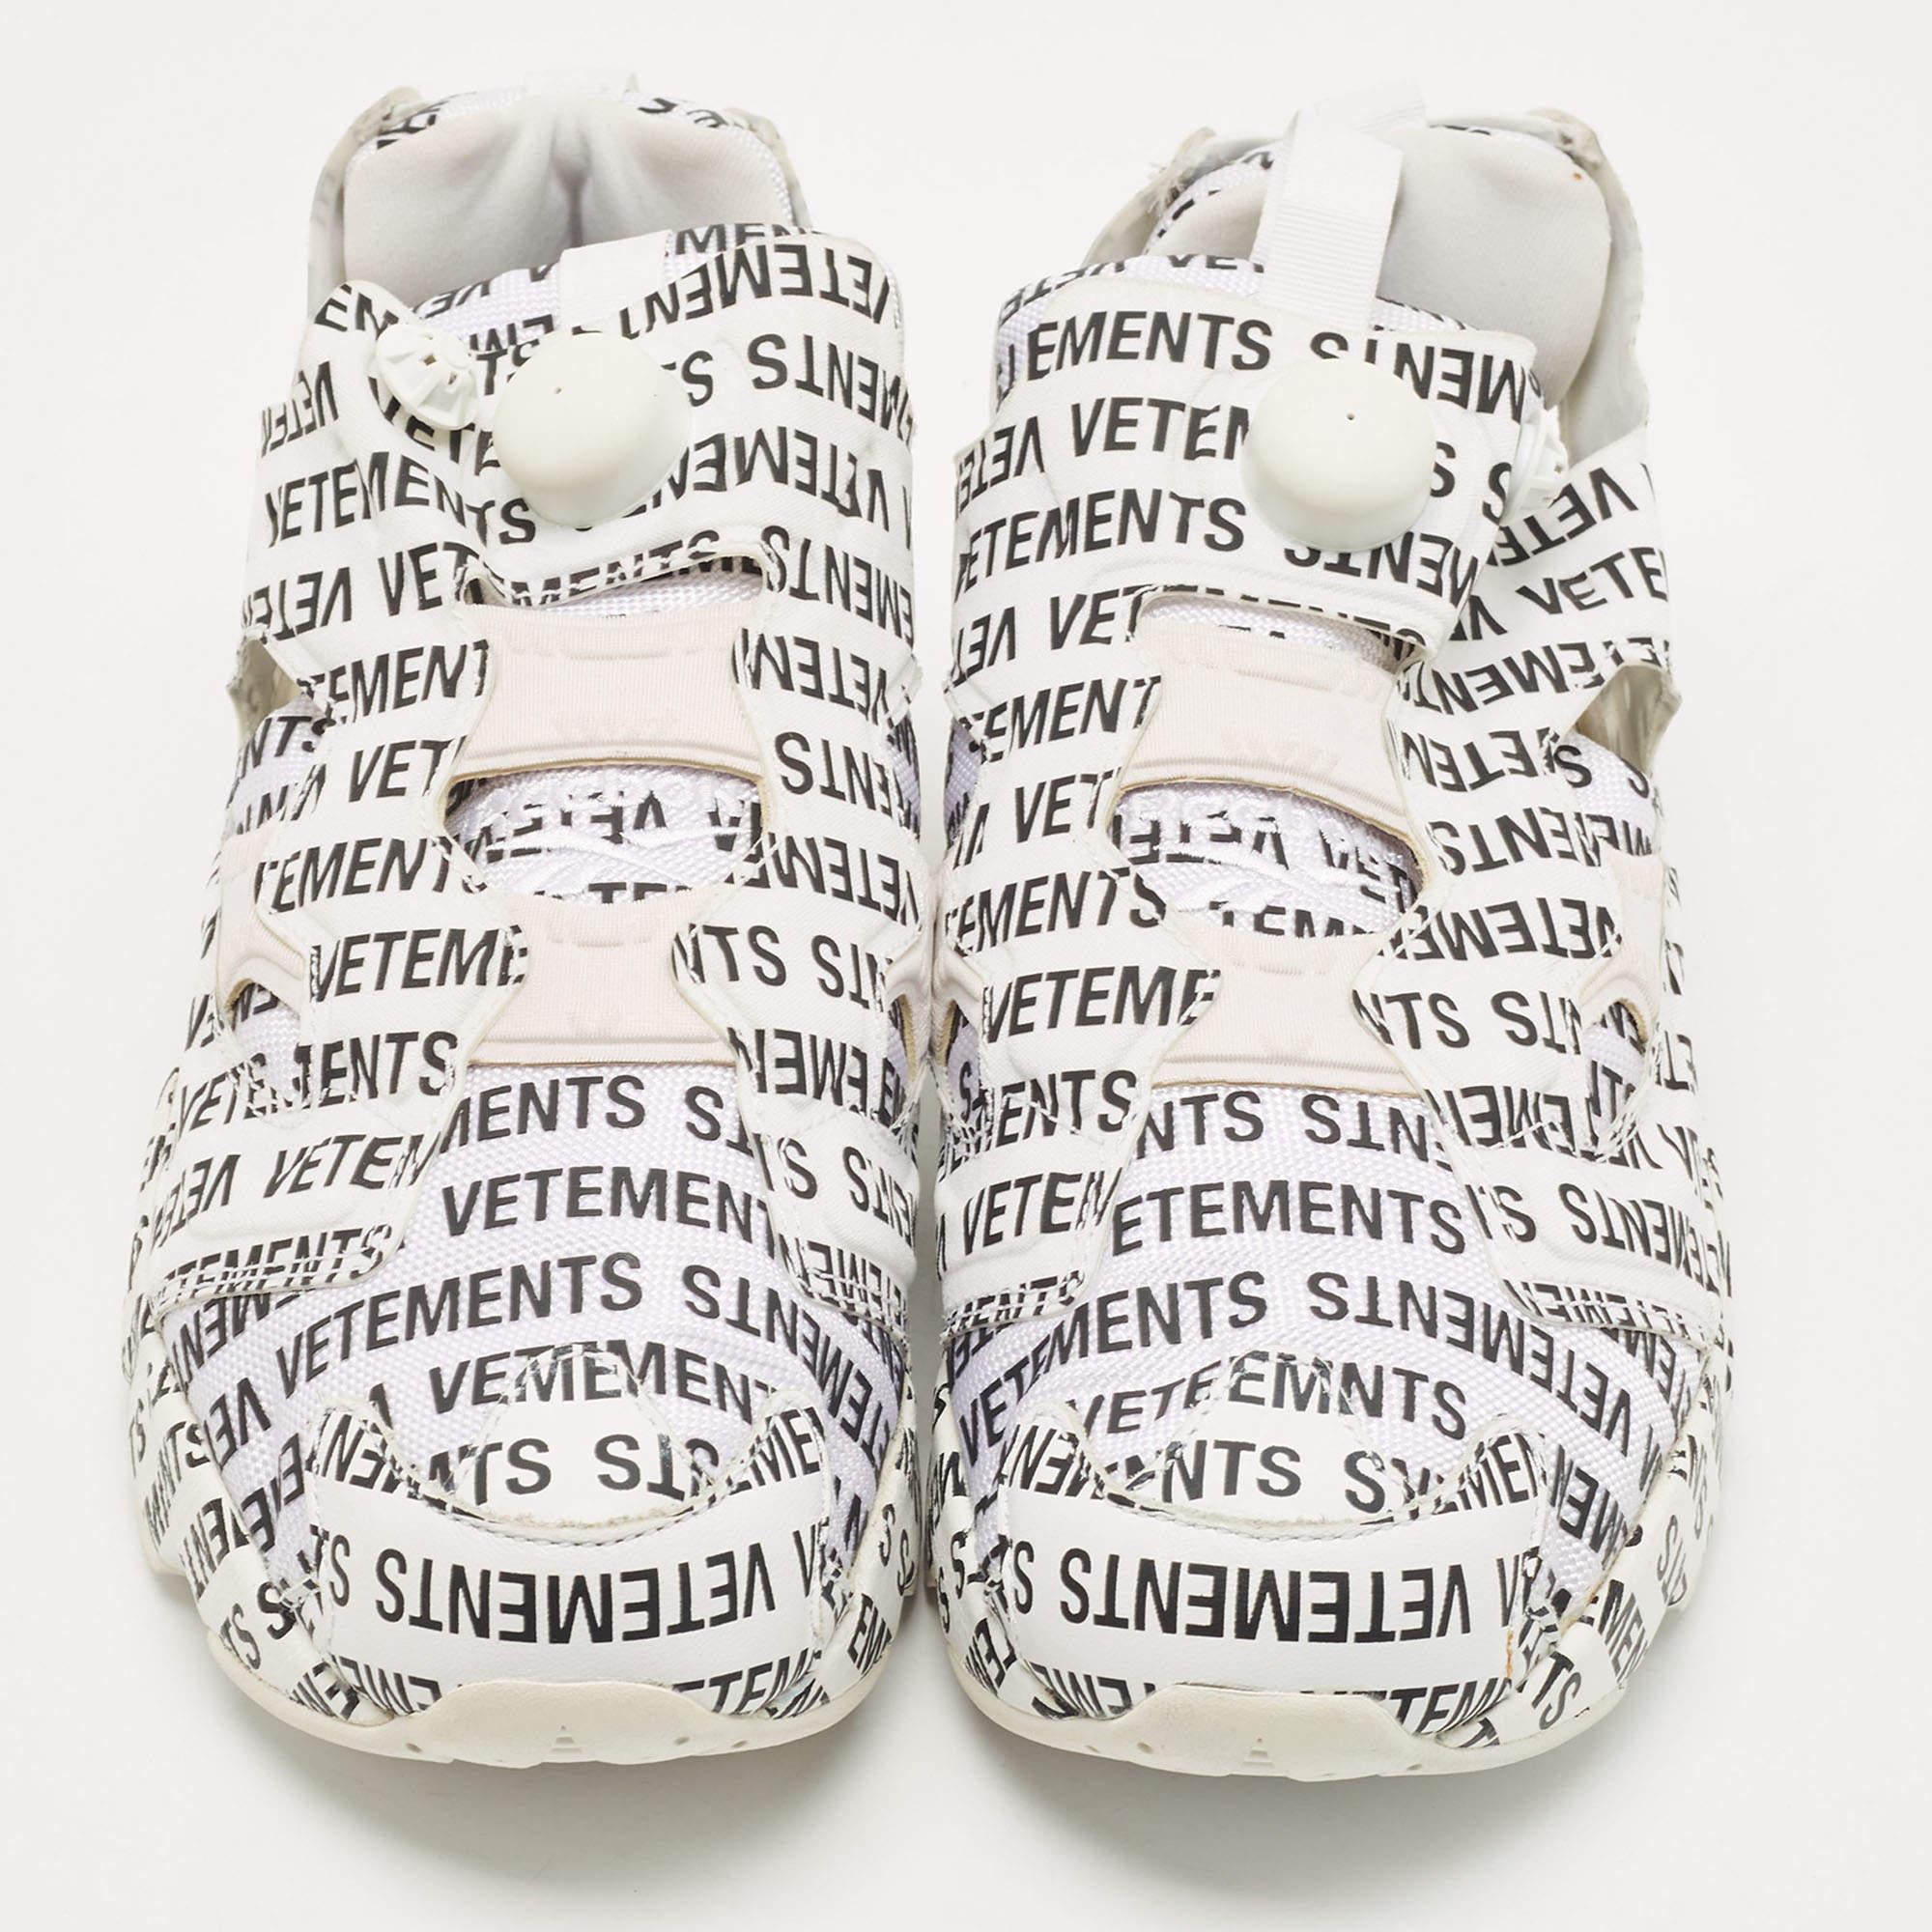 A fashionable creation, these sneakers are for making statements with your shoes. The Vetements monogram is splayed on Reebok's Instapump Fury shoe—a beautiful capture of both the brand's aesthetics!

